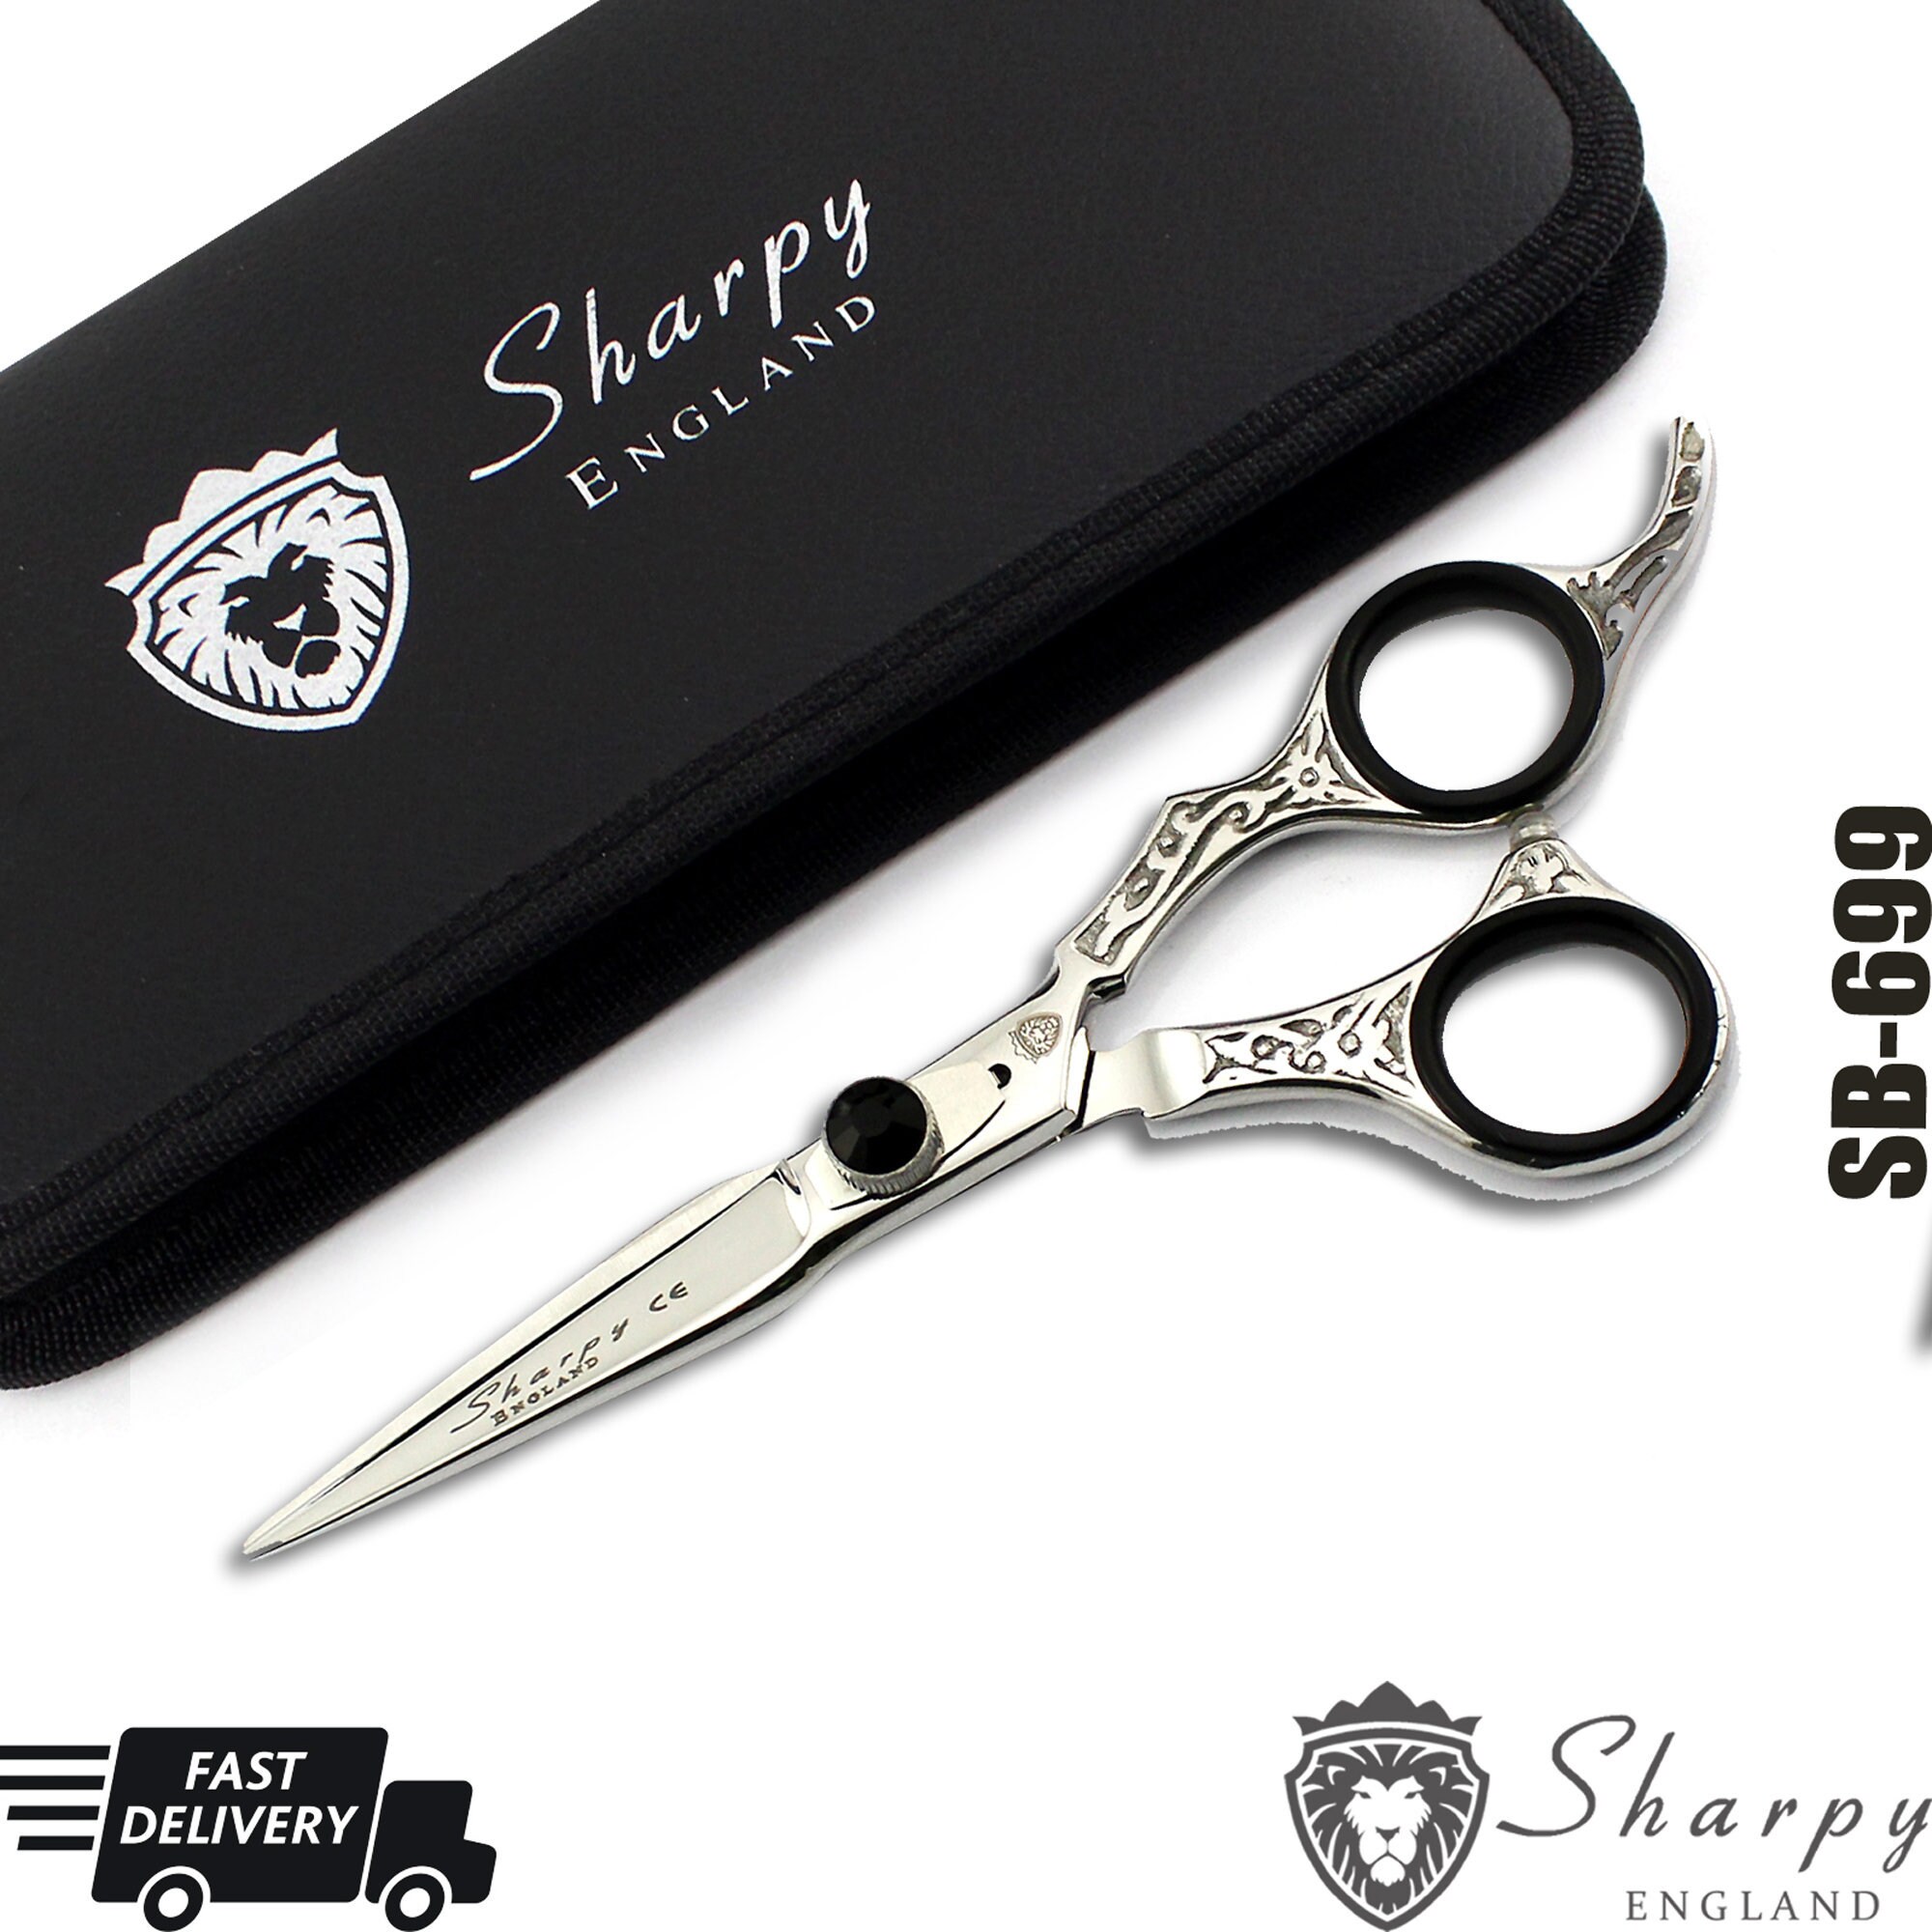 The Cut Factory- Hair Scissors and Barber Scissors Professional- 6.5 Inches  Finest Stainless Steel Hair Cutting Scissors with Smooth Razor Edge Blades